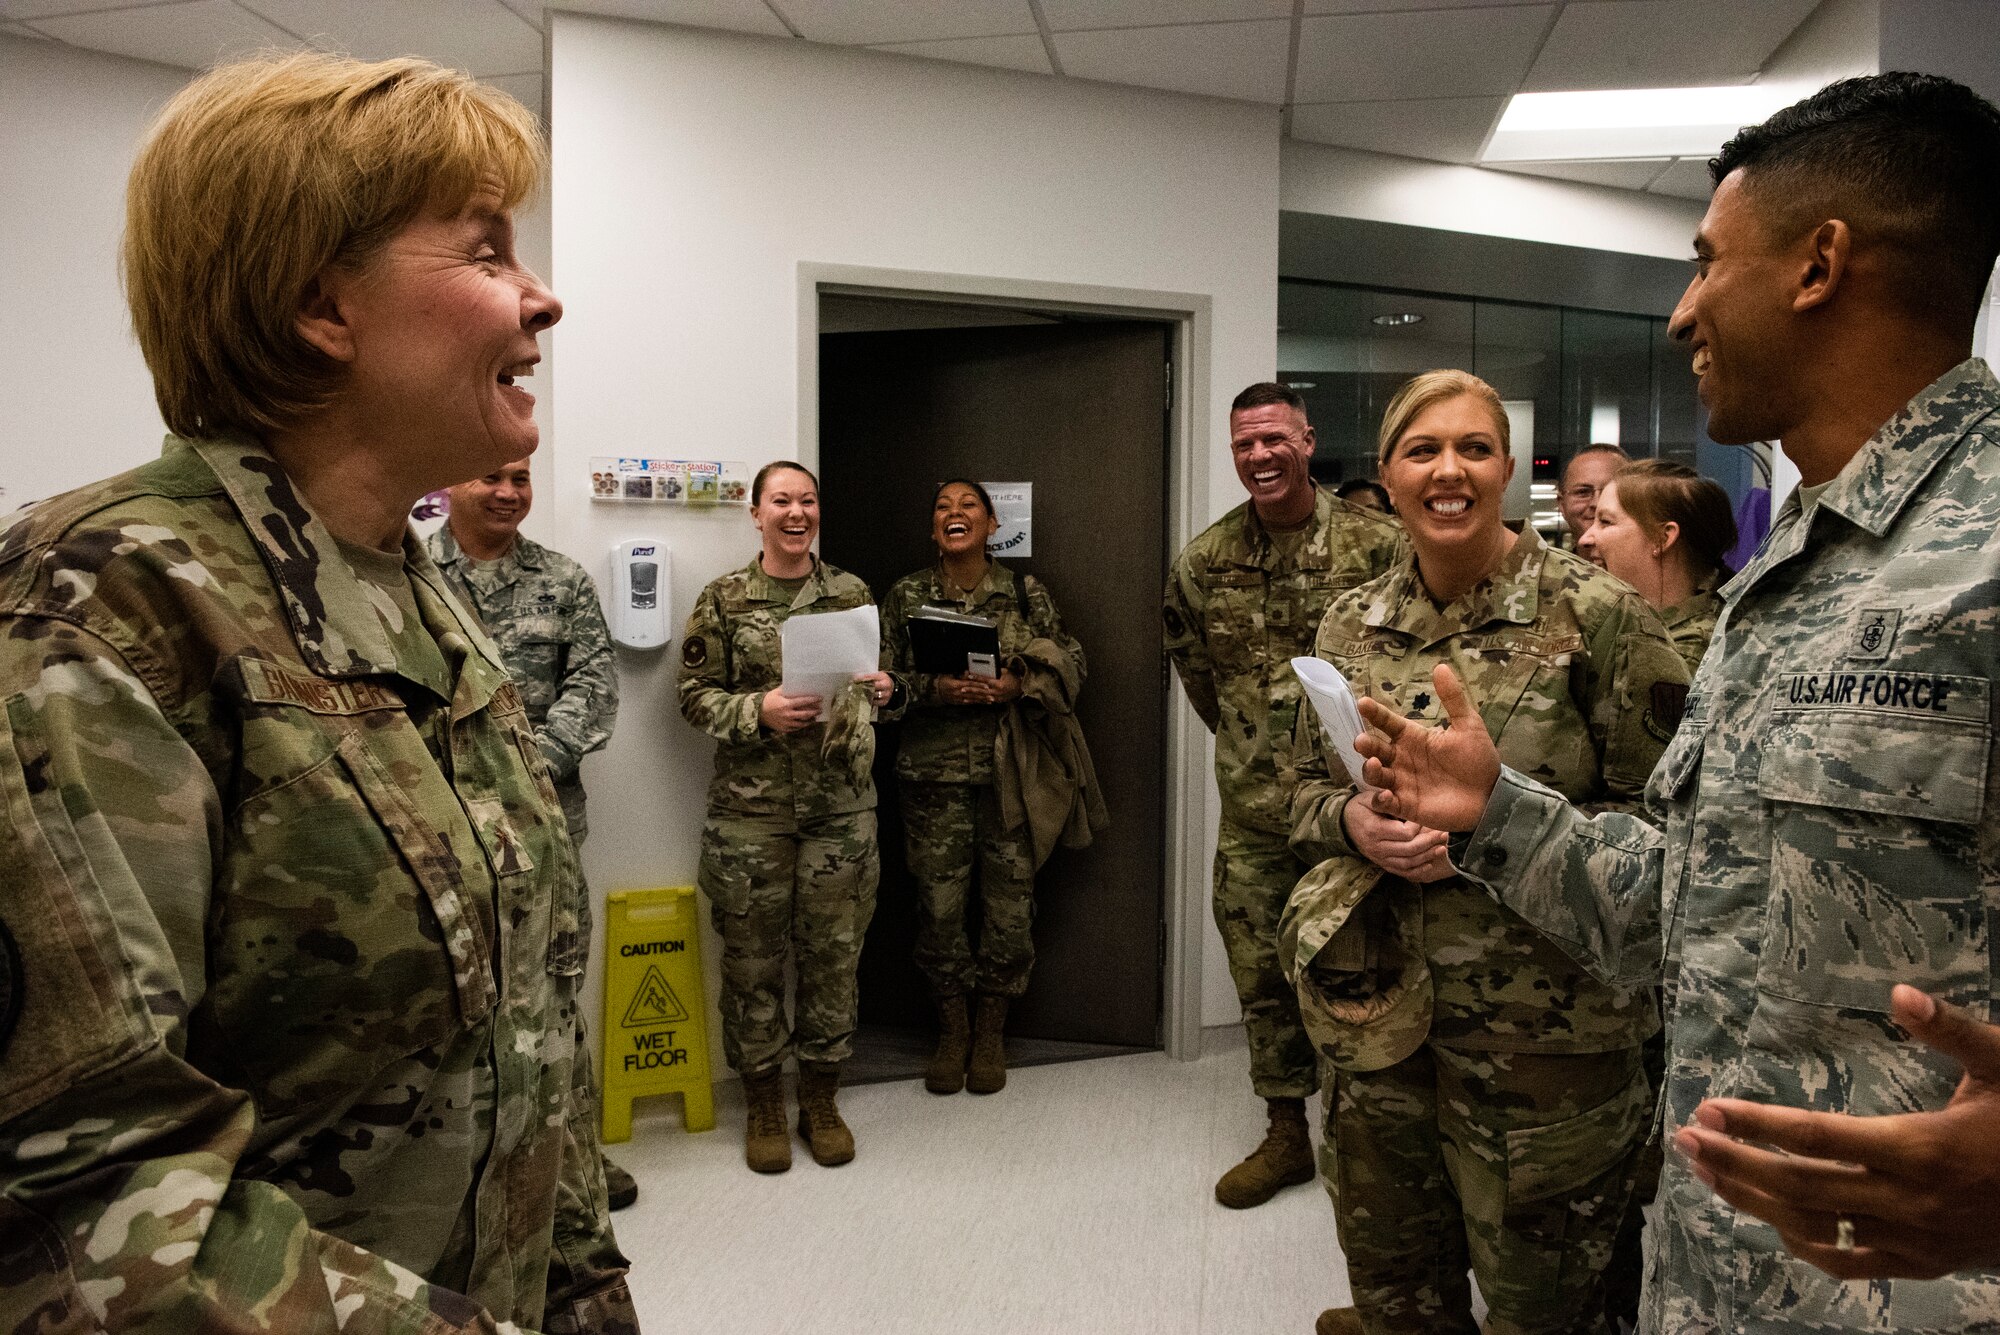 U.S. Air Force Brig. Gen. Sharon Bannister, Air Combat Command Surgeon General, left, laughs with U.S. Air Force Staff Sgt. Jadow Hughes, 325th Medical Support Squadron laboratory specialist, right, at Tyndall Air Force Base, Florida, Dec. 18, 2019. The lab had been severely undermanned for several months, mostly supported by civilian employees and Hughes, while they balanced operational needs and minimal staffing. (U.S. Air Force photo by Staff Sgt. Magen M. Reeves)